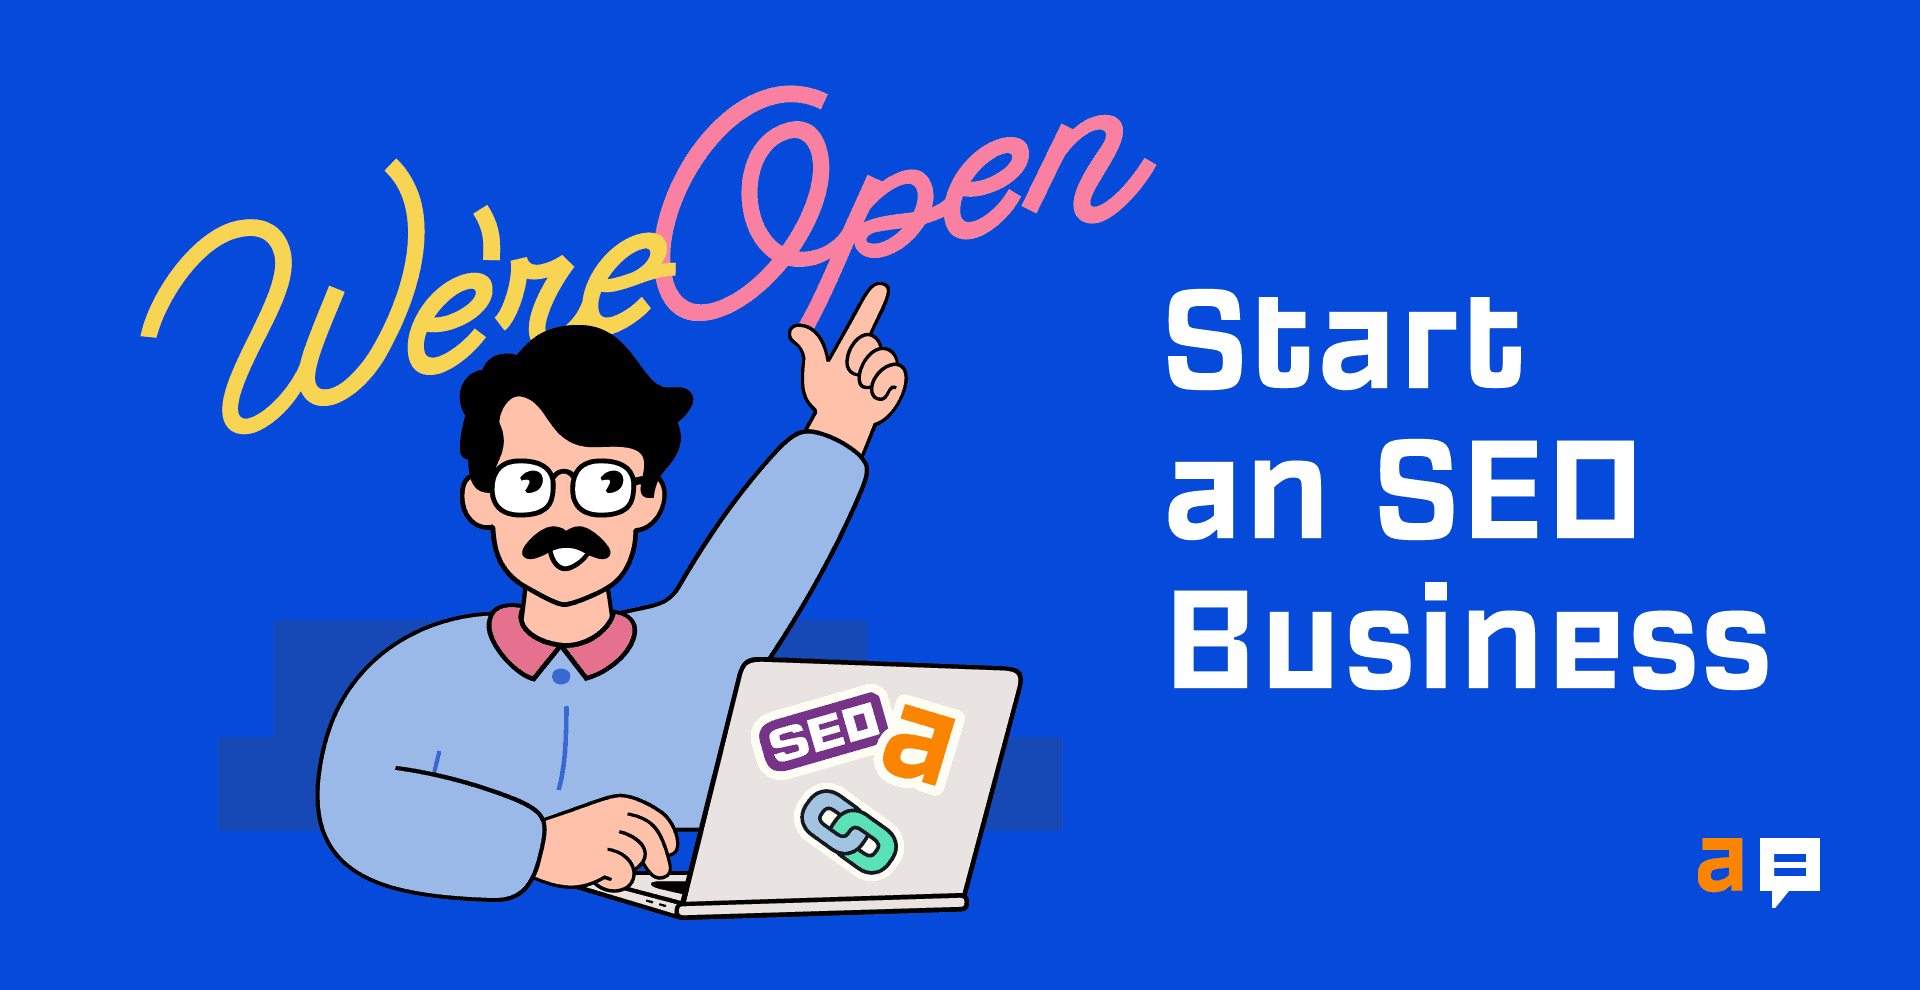 How to Start an SEO Business in 6 Steps